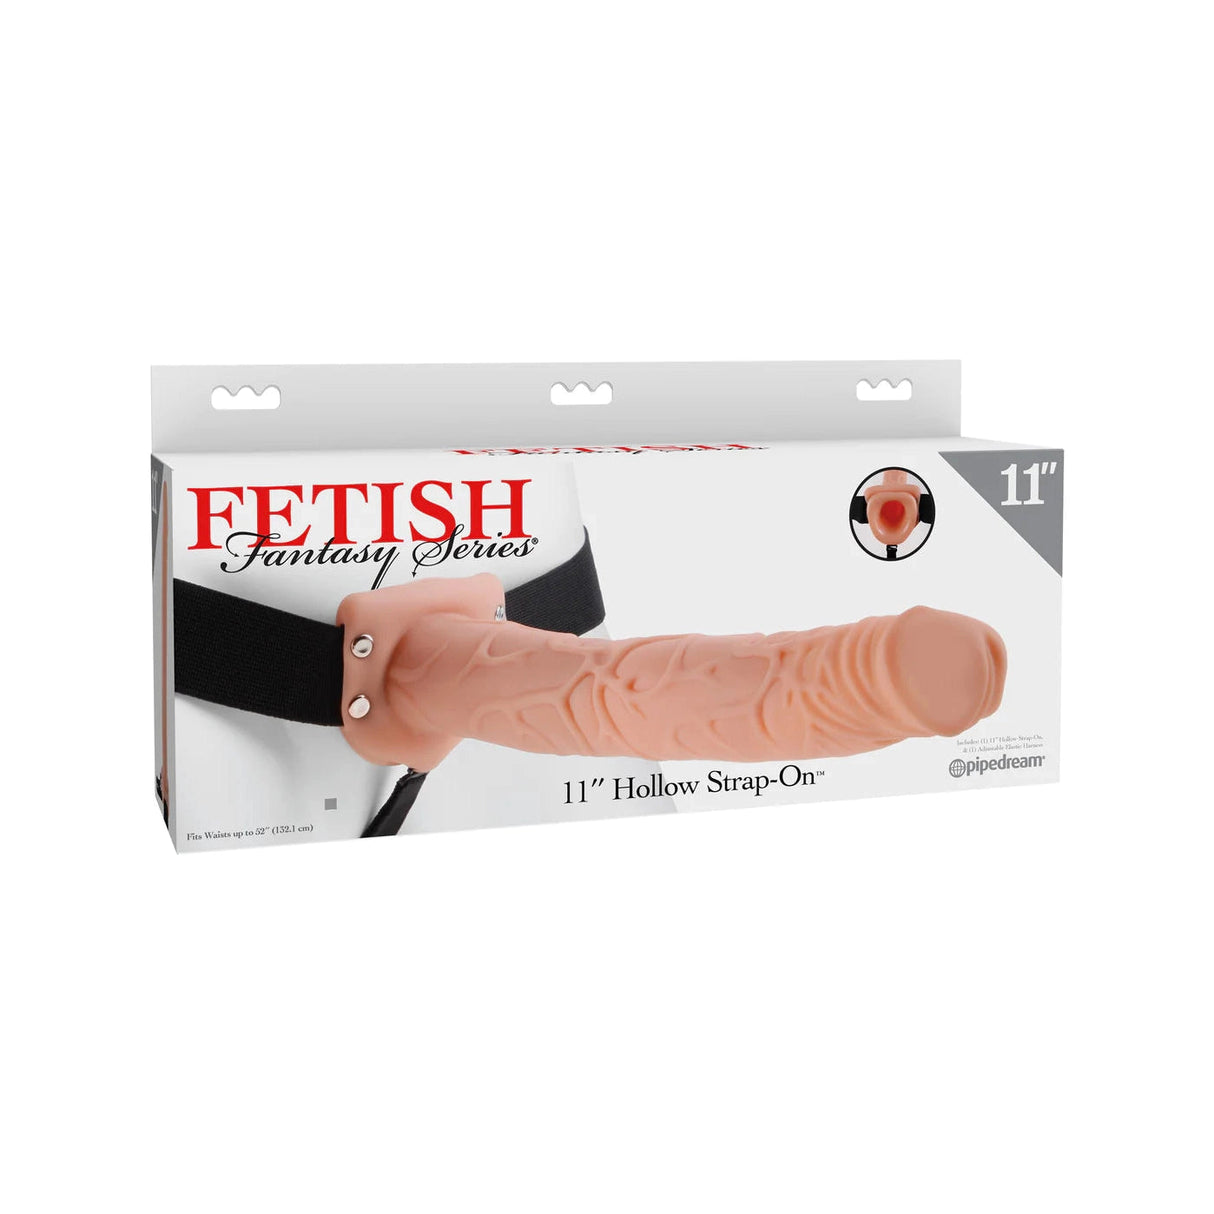 Fetish Fantasy Series Hollow Strap-On for ED